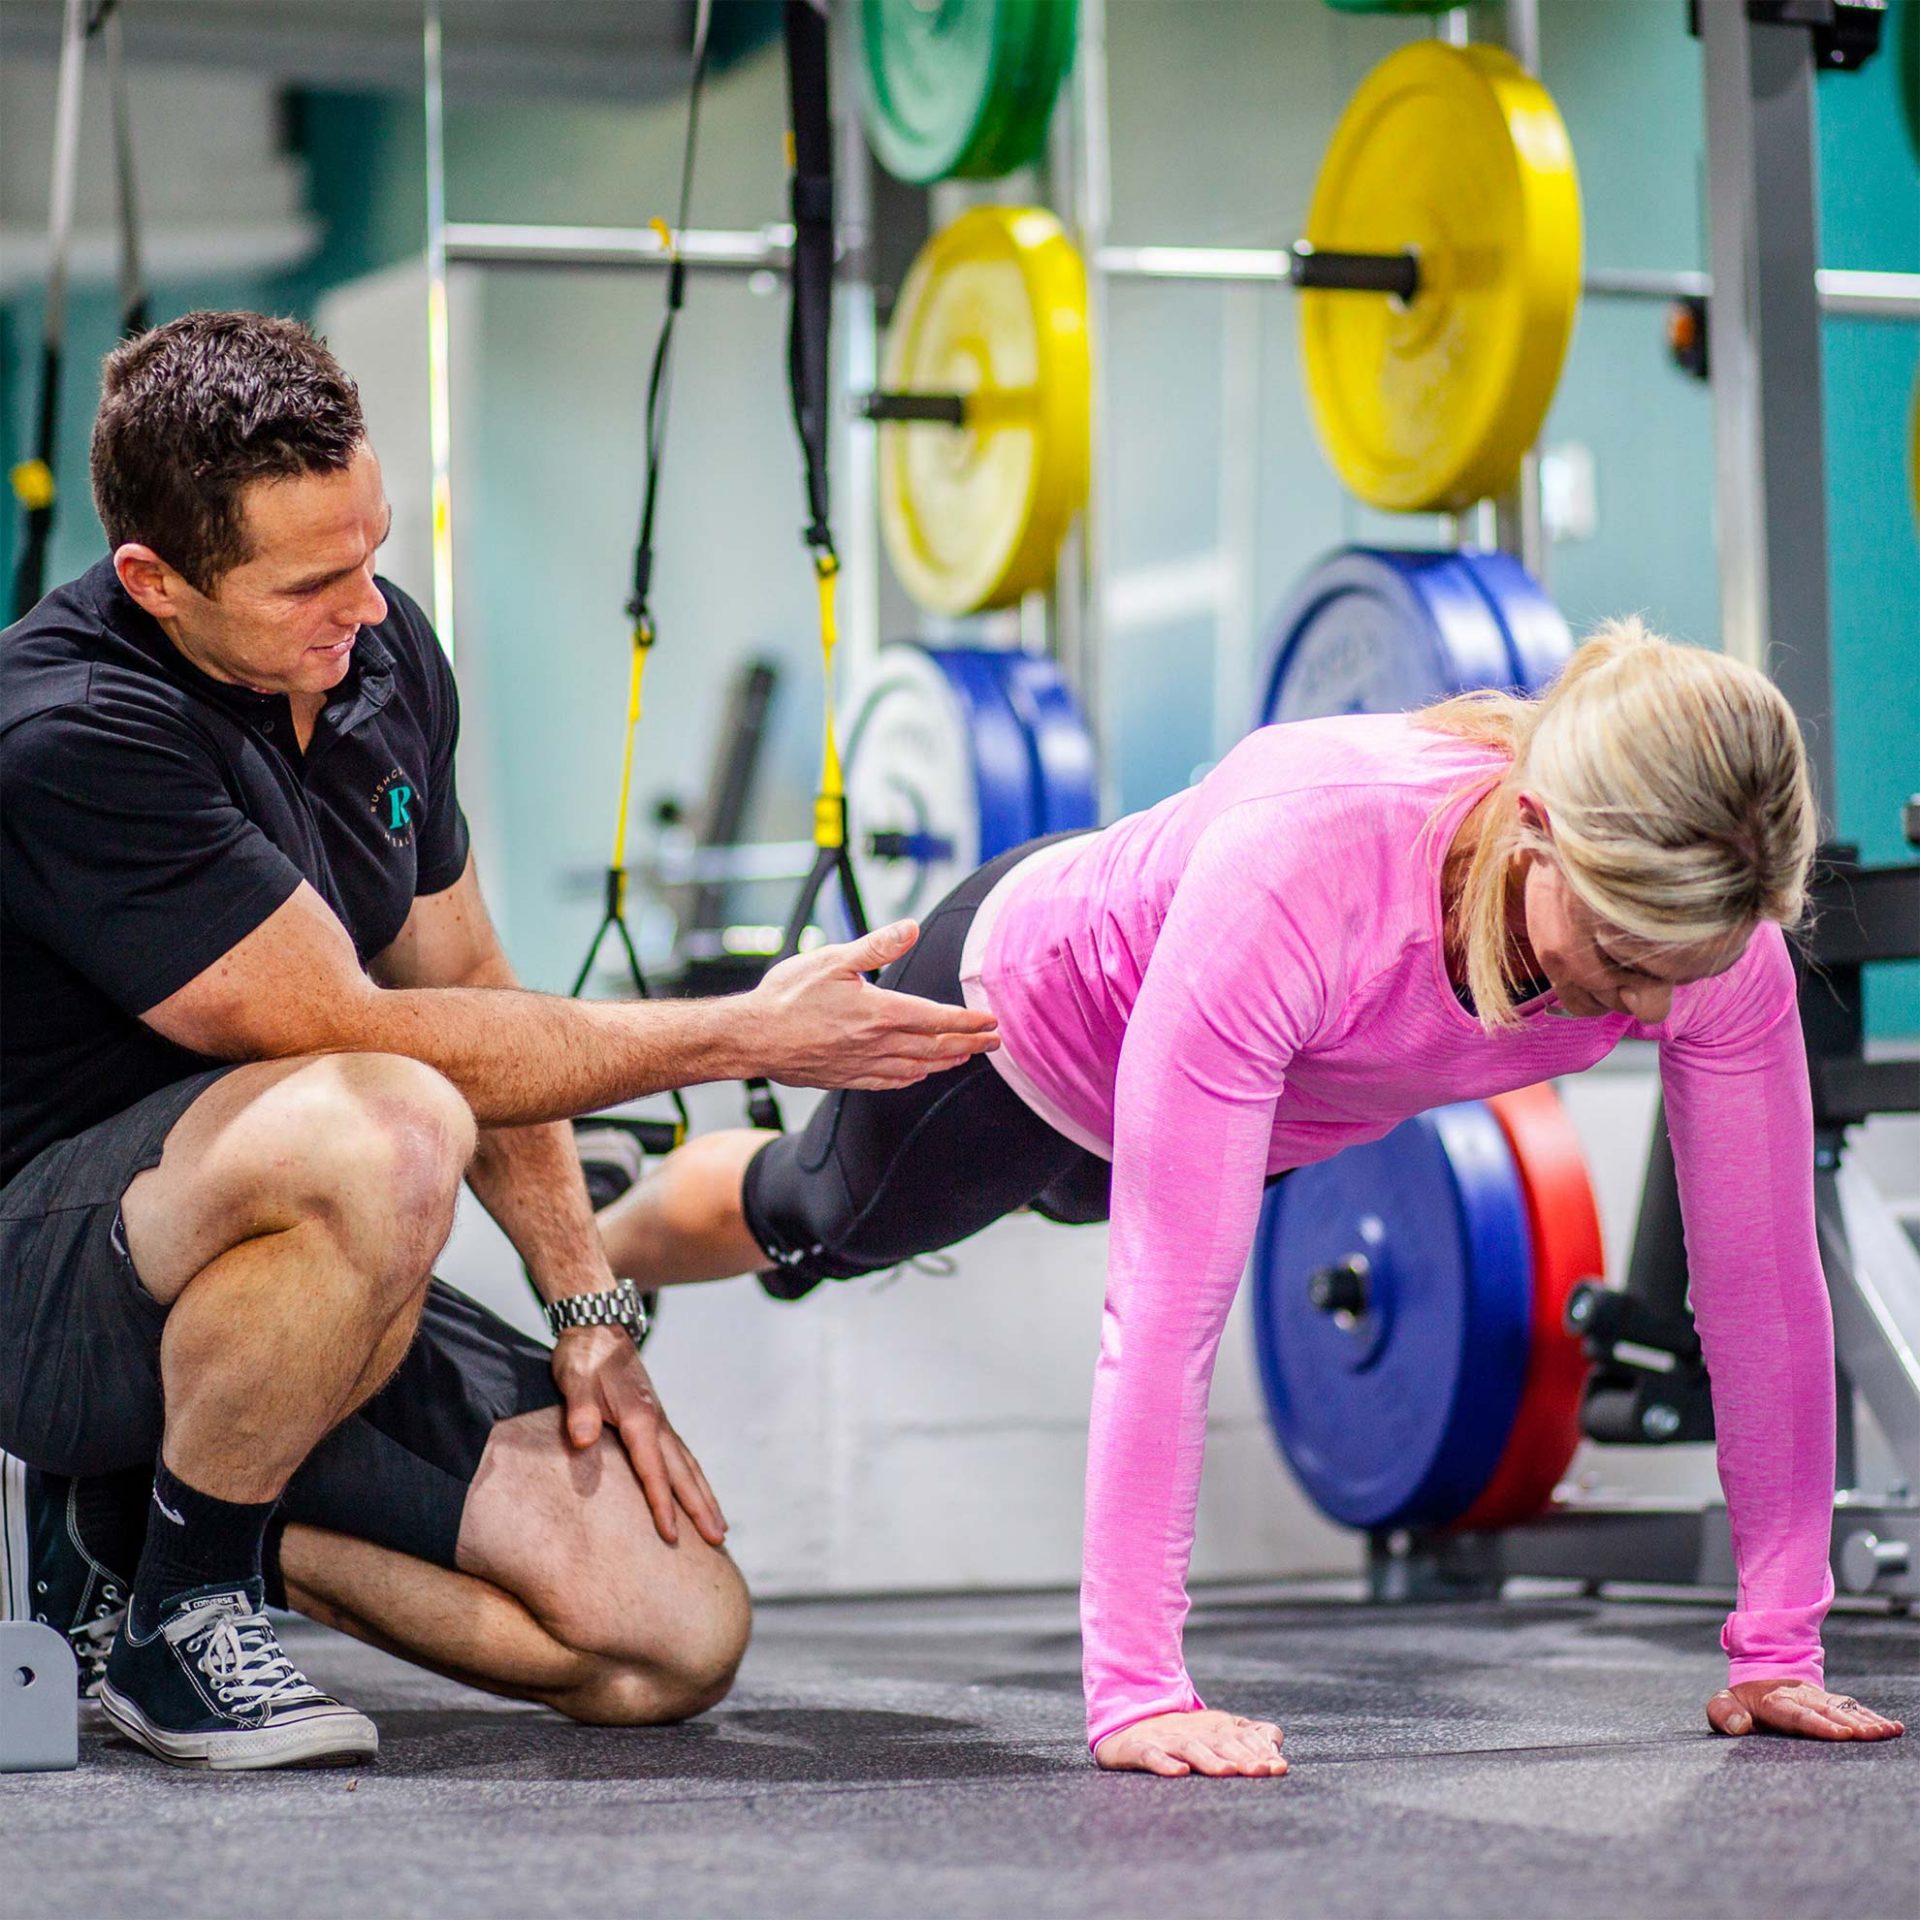 Rushcutters Health Sports Photography